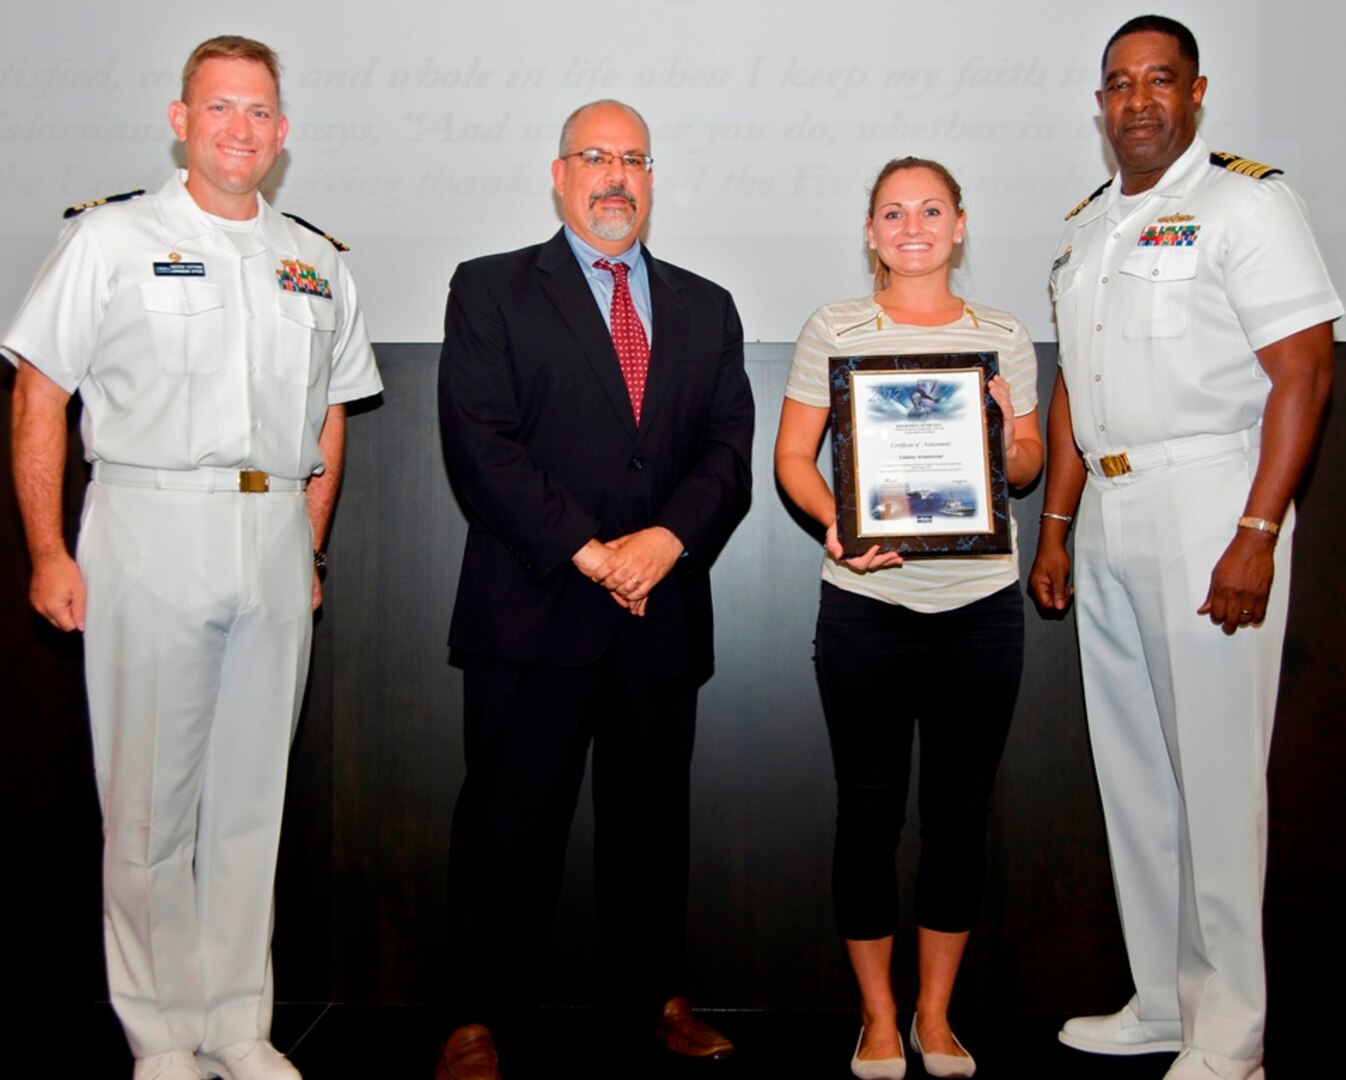 IMAGE: 170919-N-DE005-005 (bachelor's degree):
DAHLGREN, Va. - Lindsey Armentrout receives her certificate of achievement from Naval Surface Warfare Center Dahlgren Division (NSWCDD) Technical Director John Fiore, NSWCDD Commanding Officer Capt. Godfrey 'Gus' Weekes, right, and Combat Direction Systems Activity Dam Neck Commanding Officer Cmdr. Andrew Hoffman at the 2017 NSWCDD academic awards ceremony. Armentrout was recognized for completing her bachelor's in mechanical engineering from Virginia Tech, and commended for her commitment to personal and professional development.